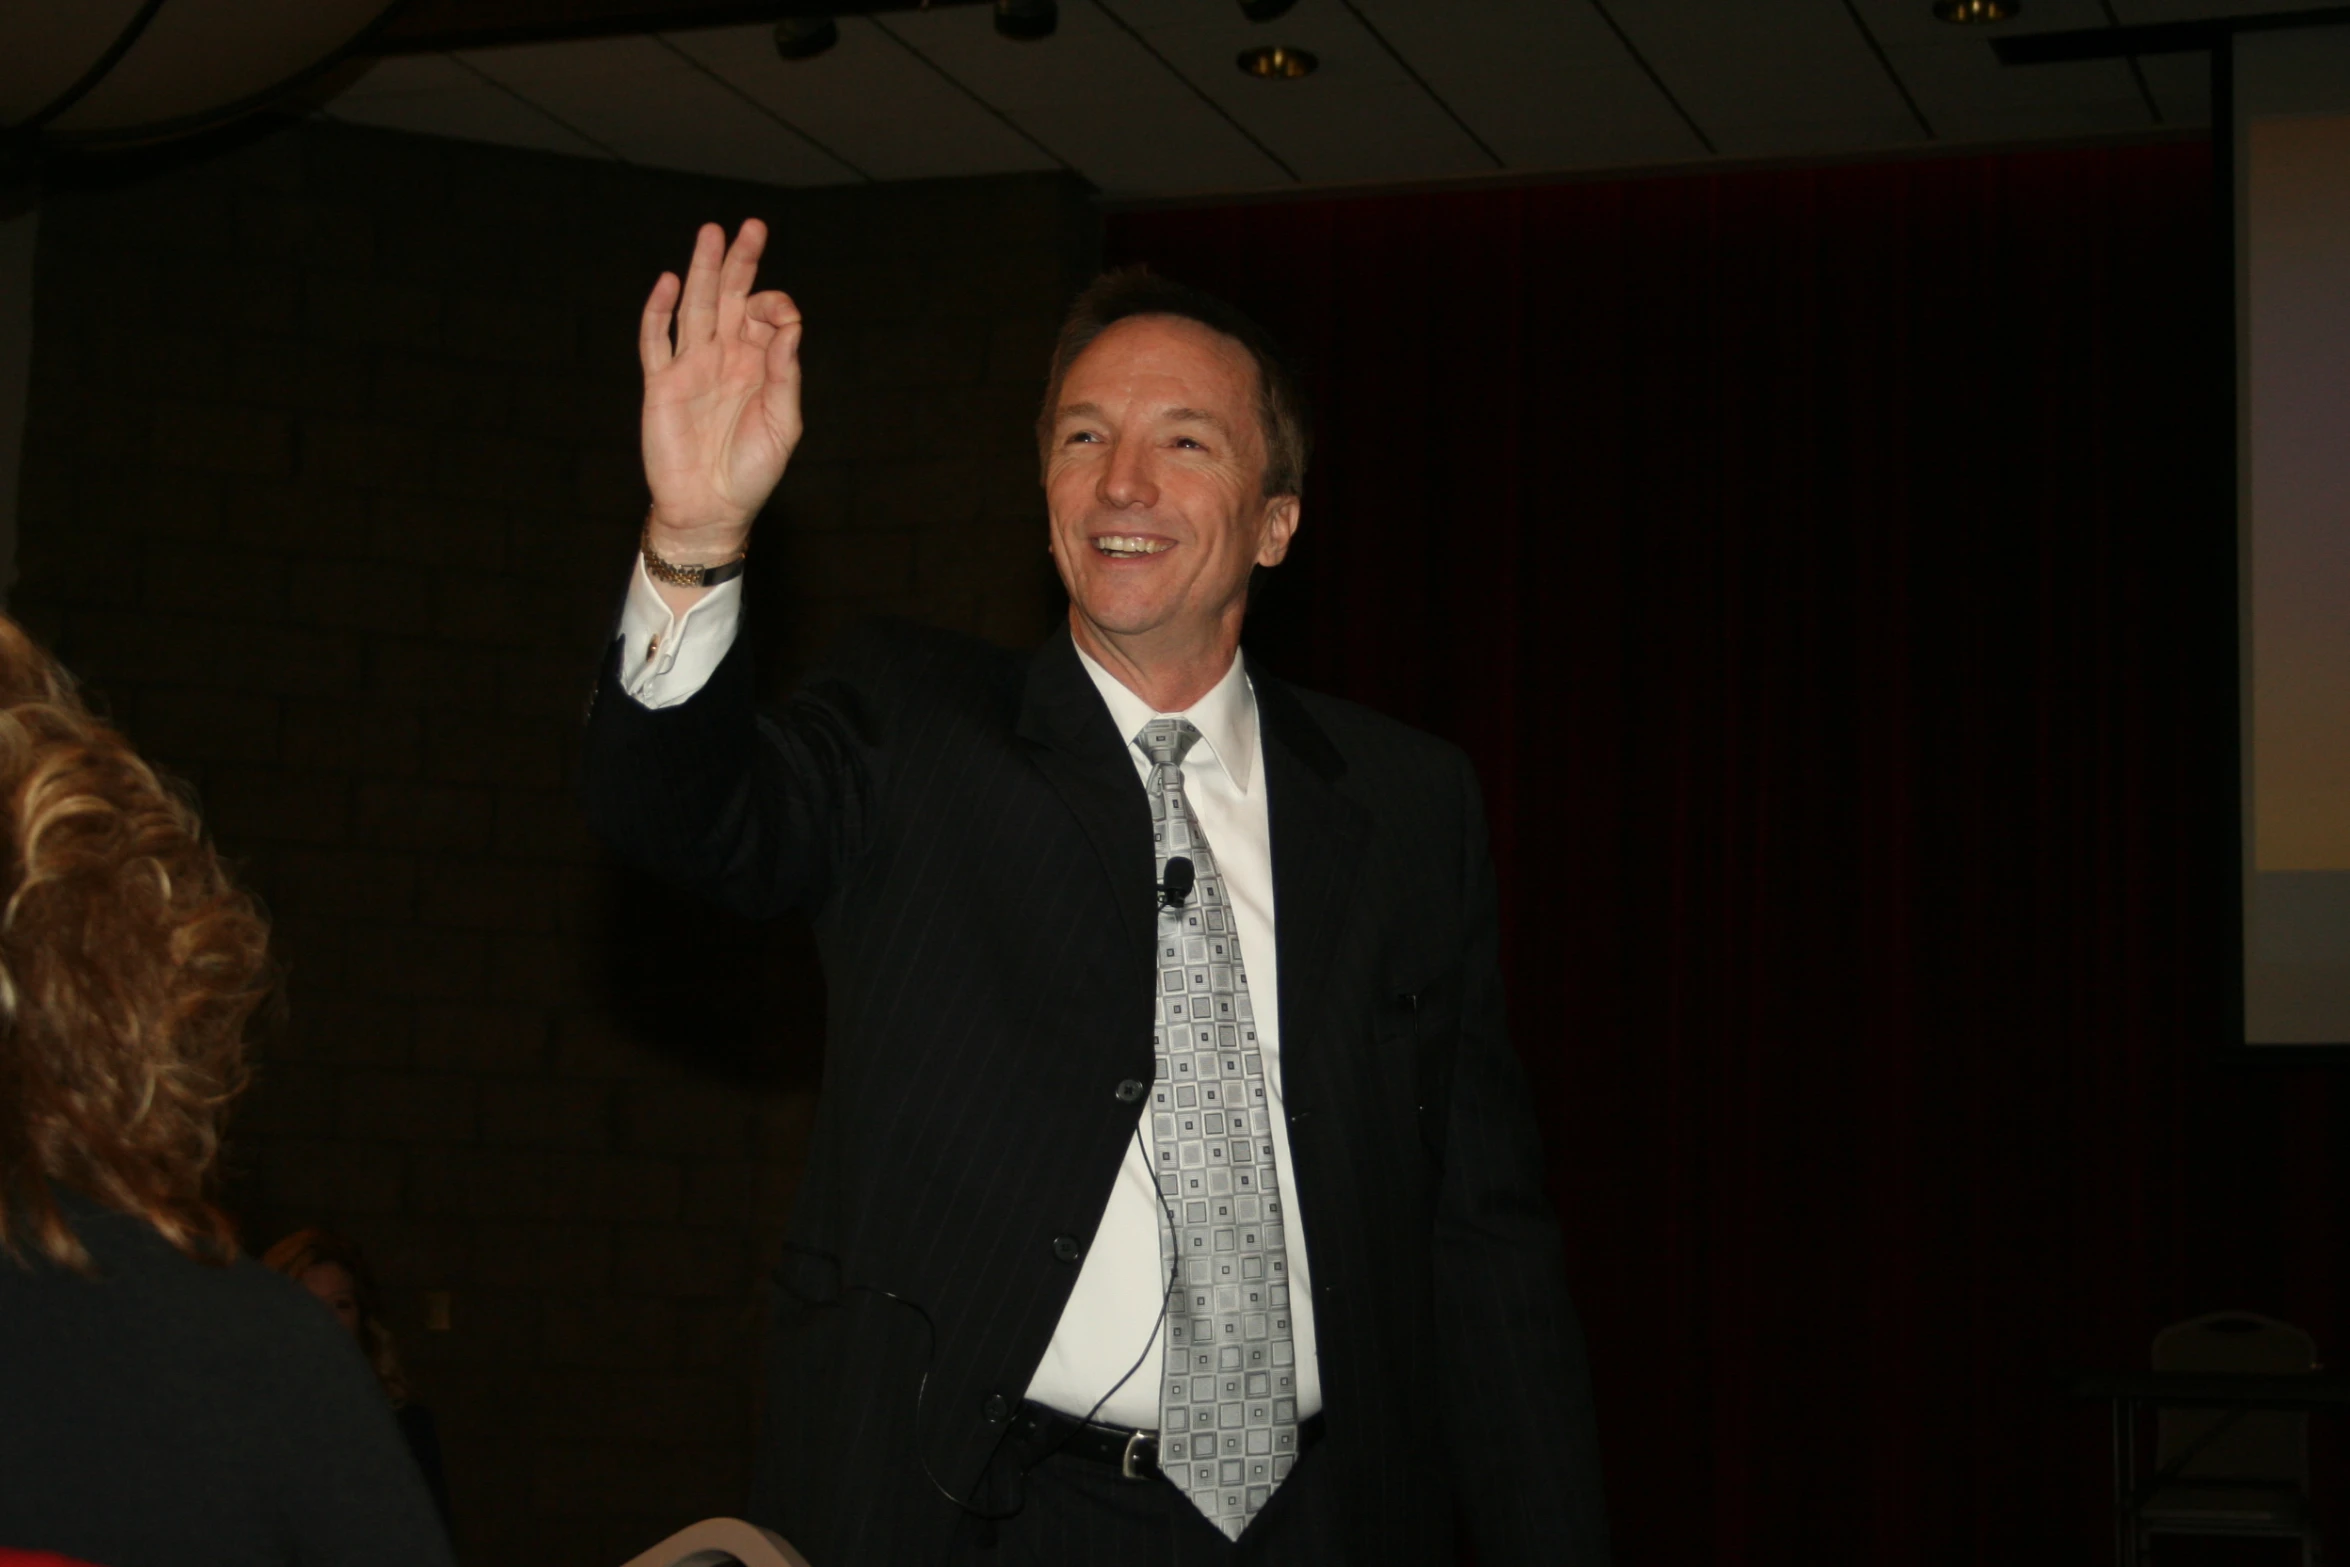 a man in suit and tie waving with a woman